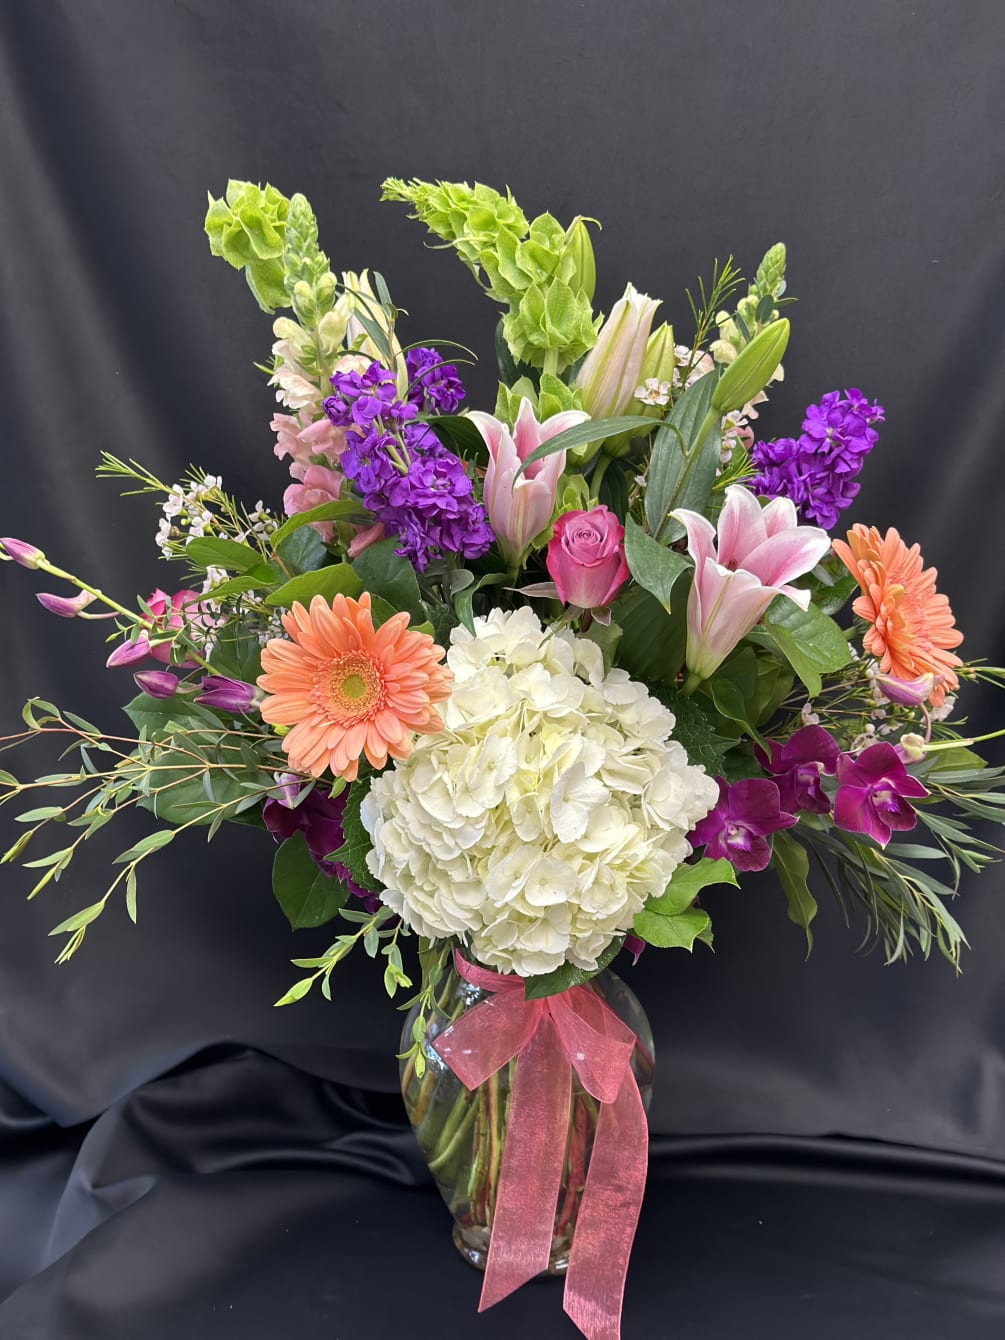 A stunning mix of seasonal favorites  - always a show stopper!
Fragrant